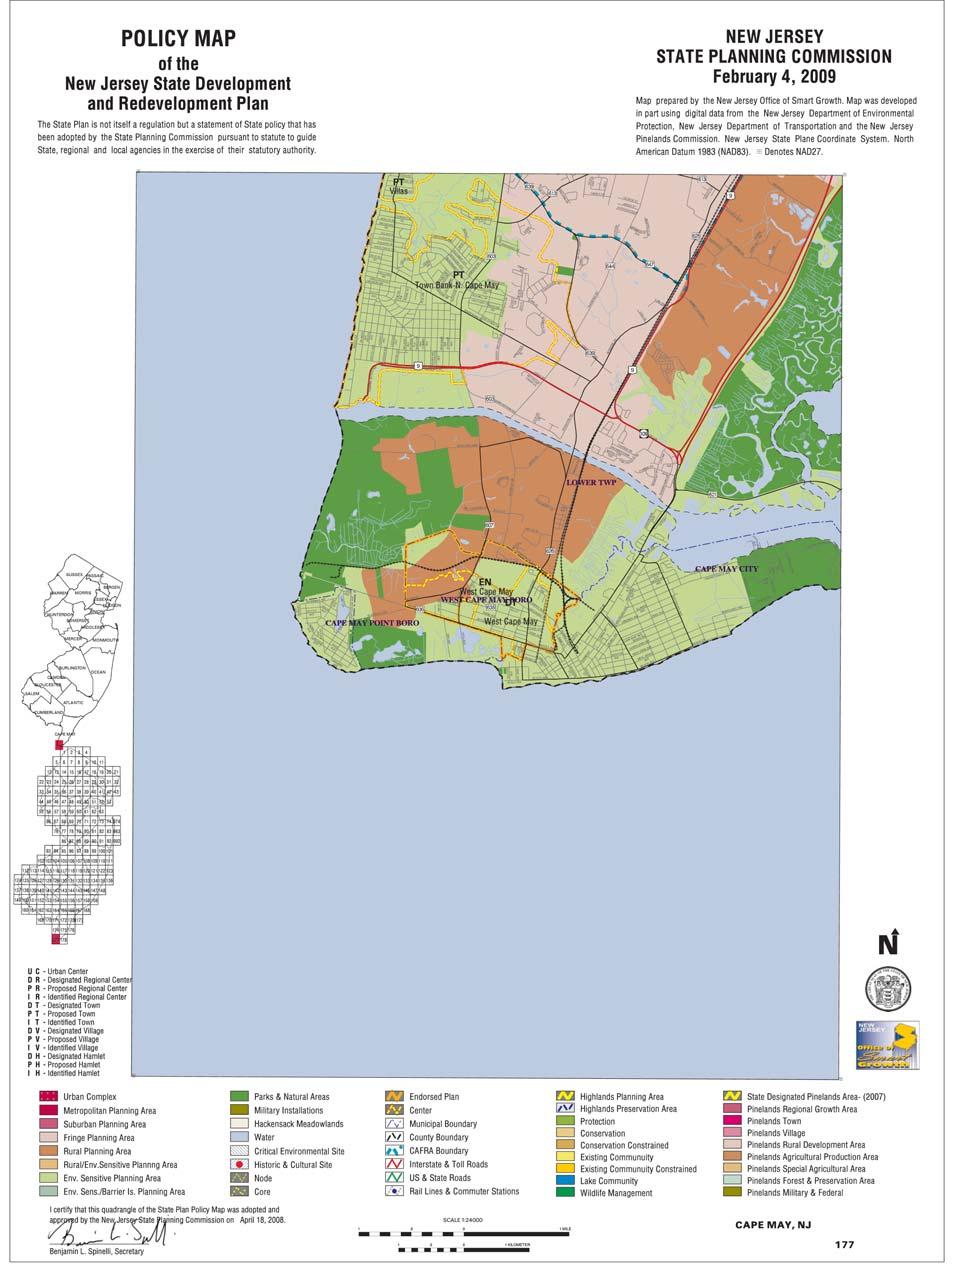 Map 1 Policy Map of the New Jersey State